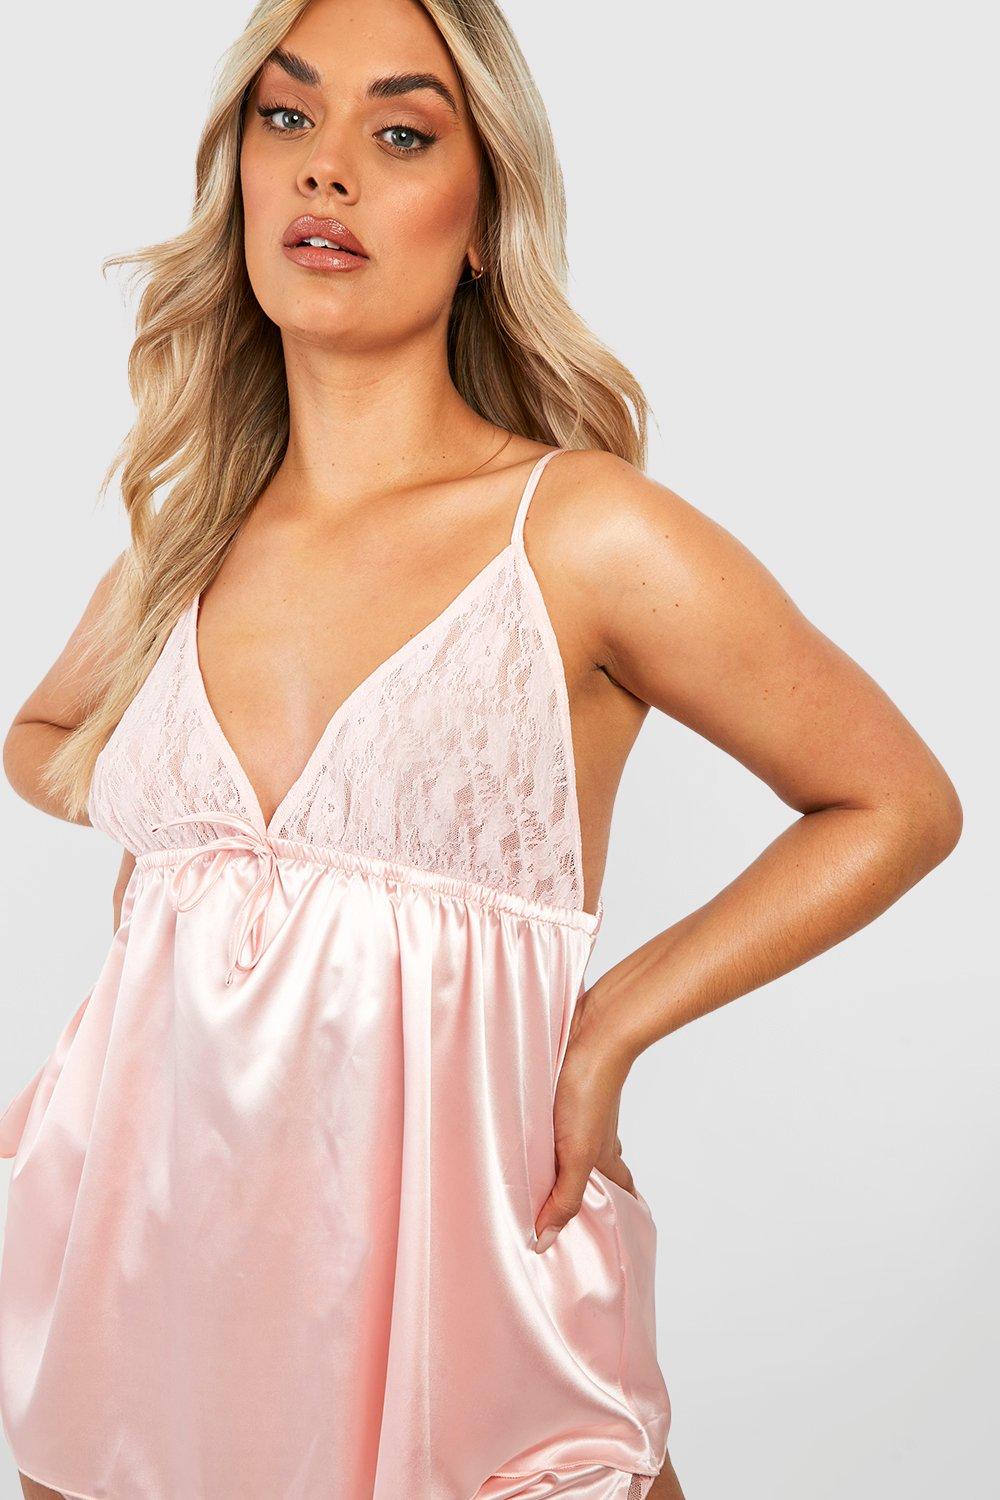 https://media.boohoo.com/i/boohoo/pzz61622_coral_xl_3/female-coral-plus-satin-and-lace-teddy-top-and-shorts-pajama-set